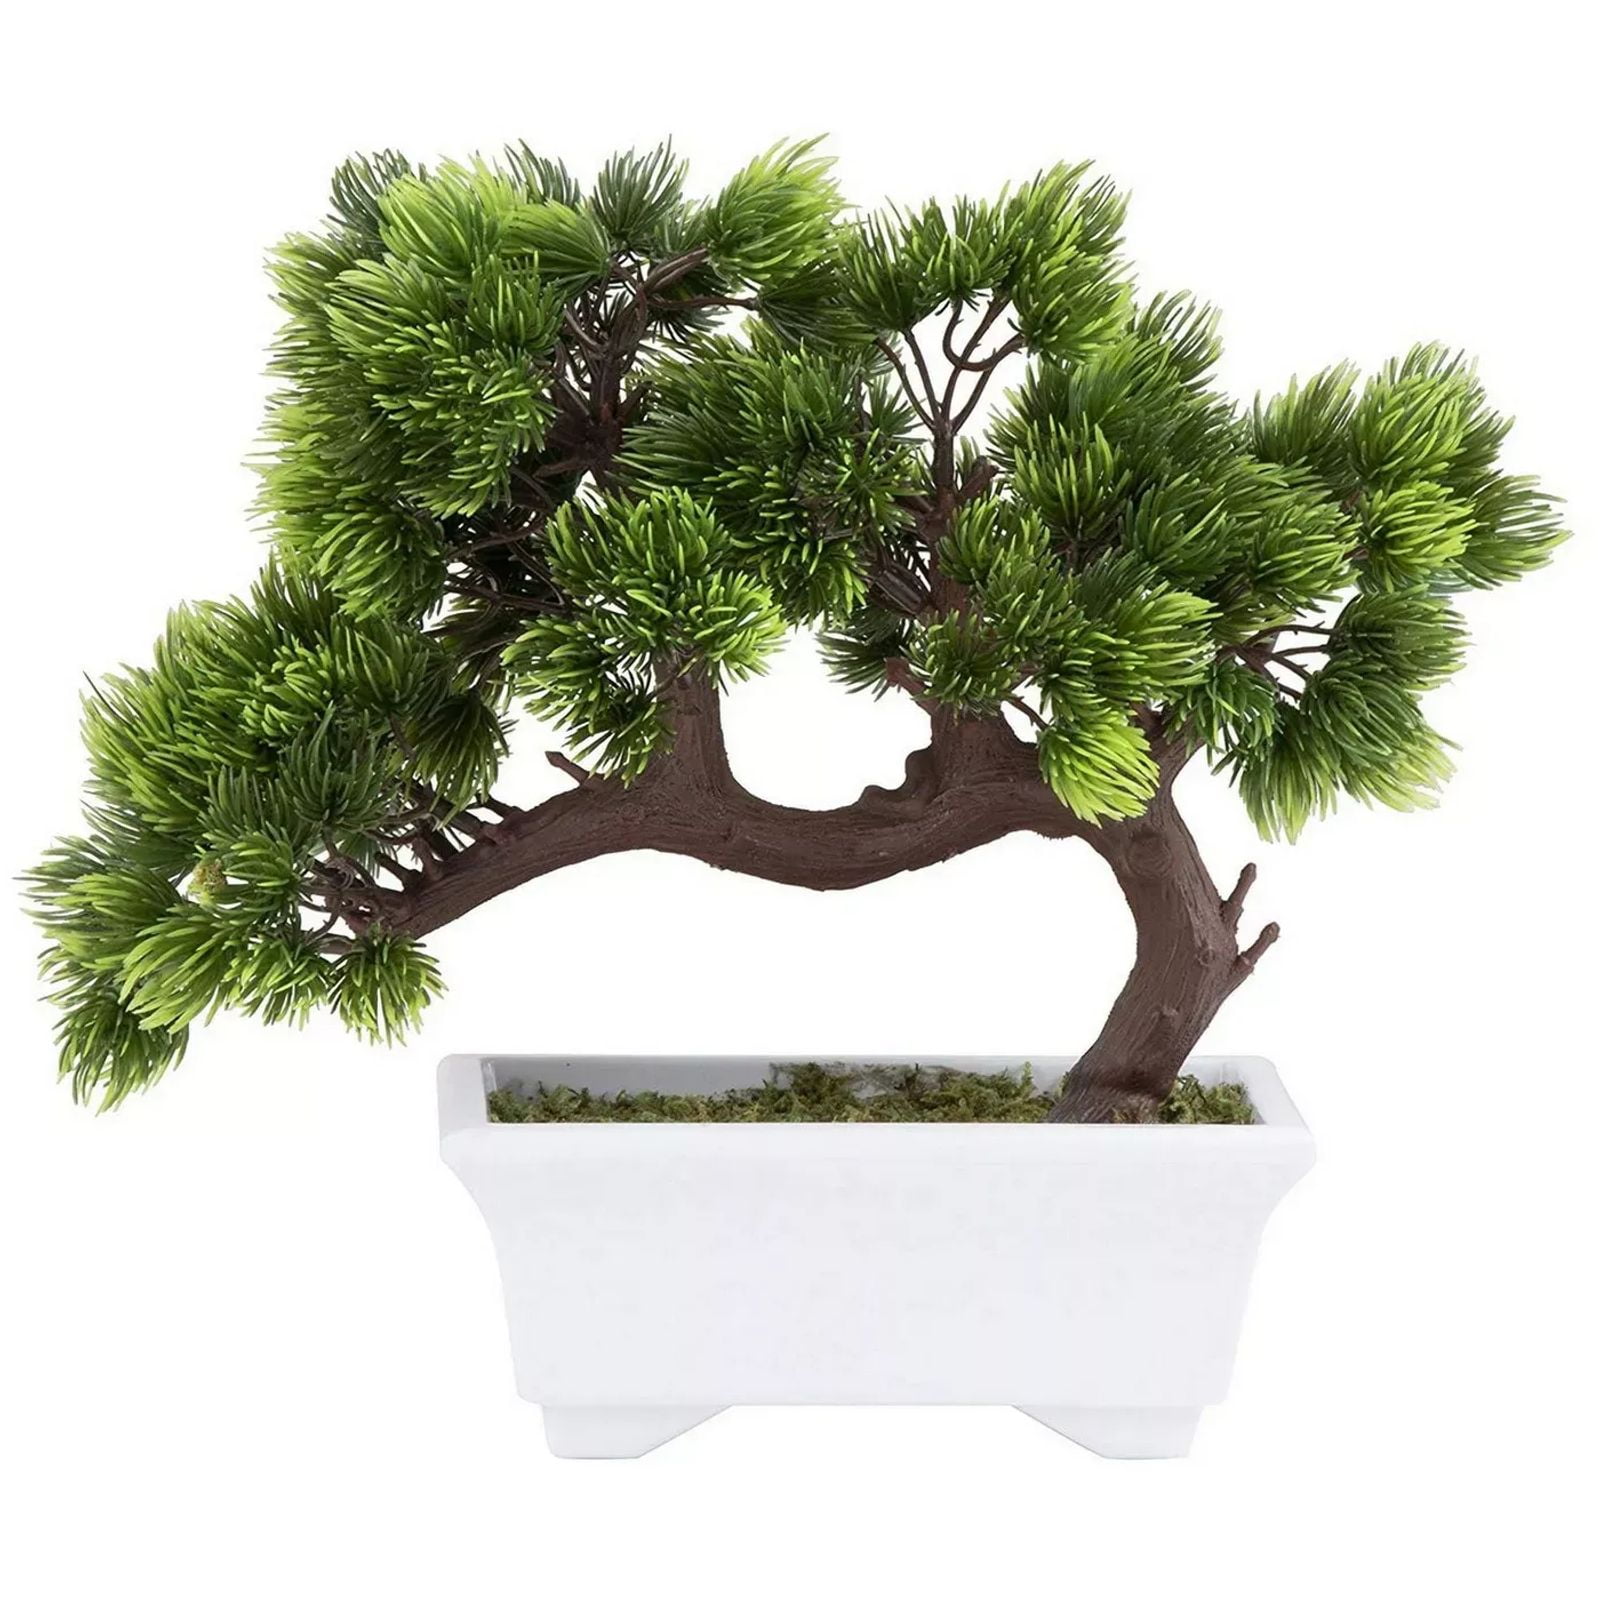 Artificial Flowers Fake Welcoming Pine Potted Plant Ornament Bonsai Home Decor 